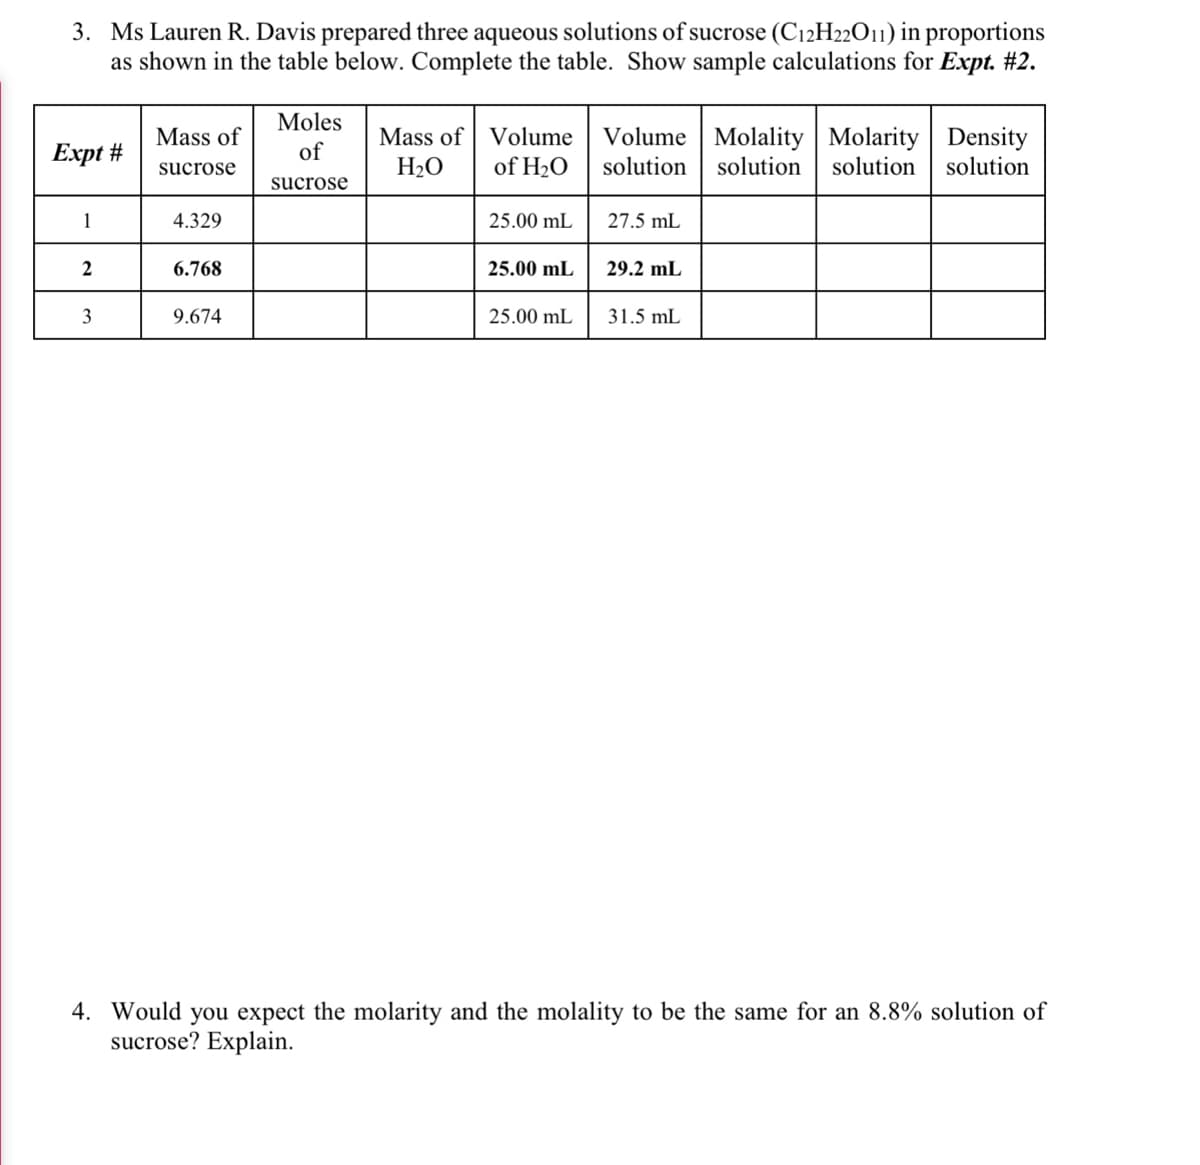 3. Ms Lauren R. Davis prepared three aqueous solutions of sucrose (C12H22O11) in proportions
as shown in the table below. Complete the table. Show sample calculations for Expt. #2.
Moles
Mass of Volume
of H2O
H2O
Volume | Molality | Molarity | Density
solution
Mass of
Еxpt #
of
sucrose
solution
solution
solution
sucrose
1
4.329
25.00 mL
27.5 mL
6.768
25.00 mL
29.2 mL
3
9.674
25.00 mL
31.5 mL
4. Would you expect the molarity and the molality to be the same for an 8.8% solution of
sucrose? Explain.
